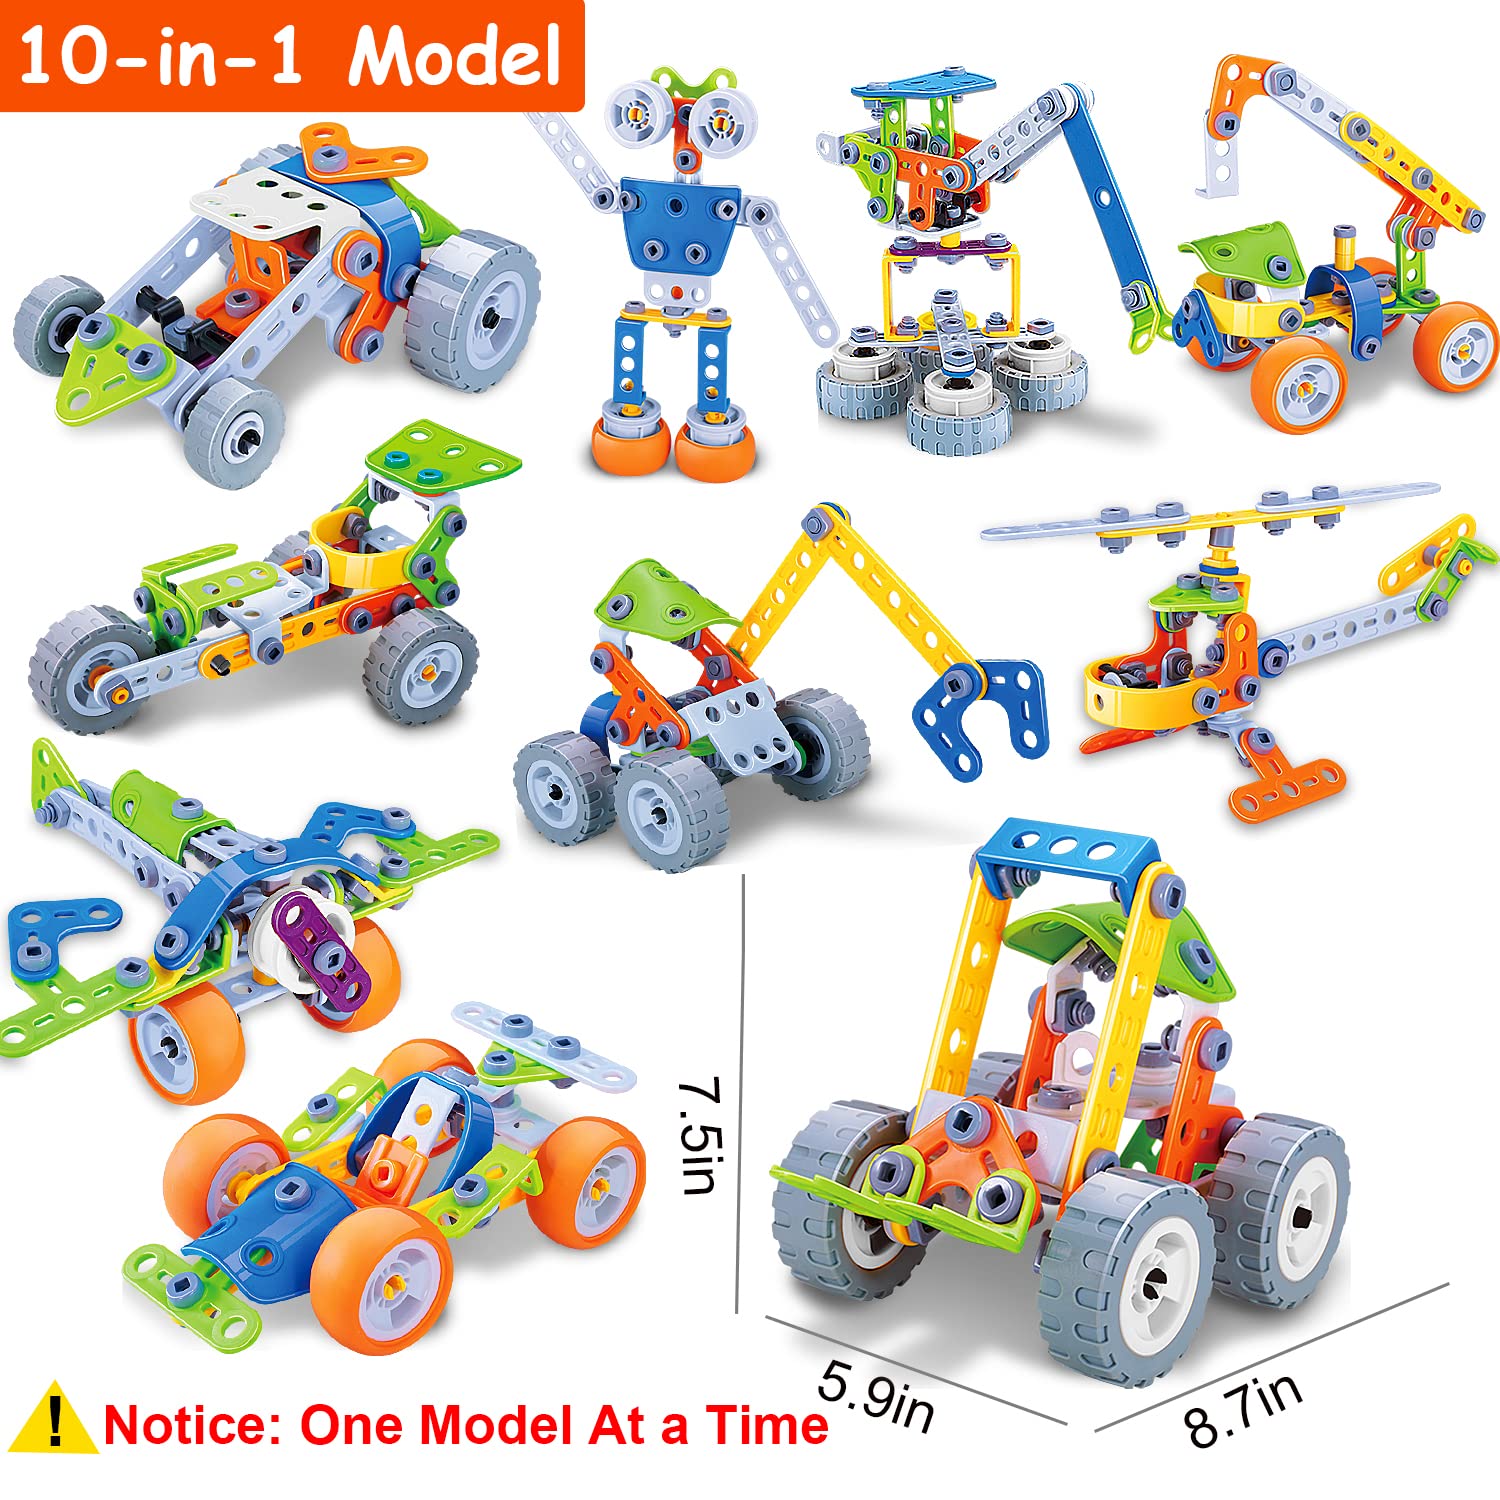 10 in 1 STEM Toys for 5 6 7 8+ Year Old Boy Birthday Gifts Building Toys for Kids Ages 4-8 5-7 6-8 Educational Stem Activities Robot Toy for Boys 4-6 4-7 Build and Play Construction Set Creative Games